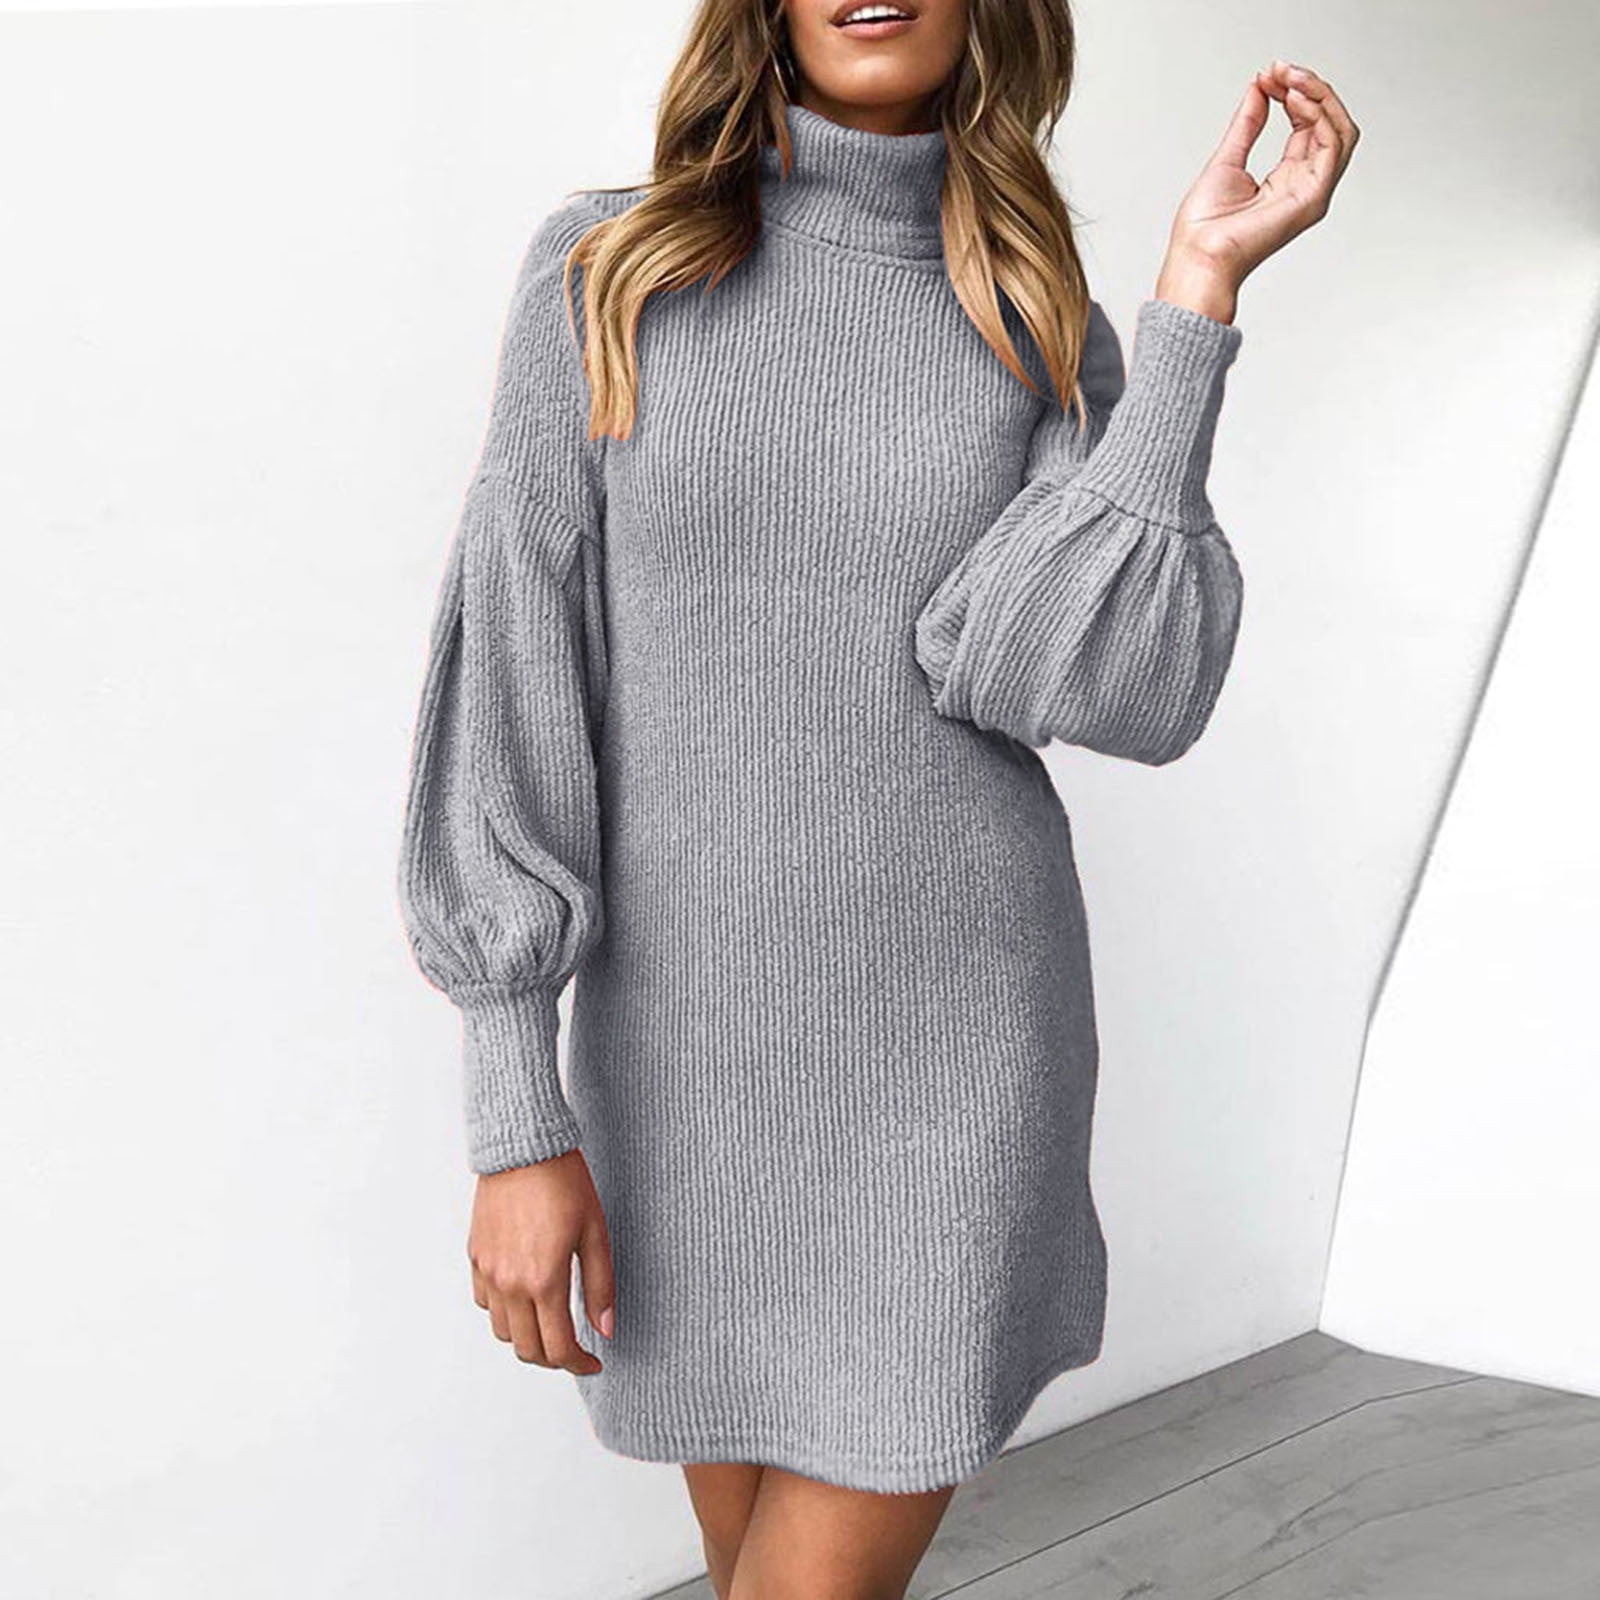 Women Crewneck Long Sleeve Slouchy Oversized Winter Casual Cable